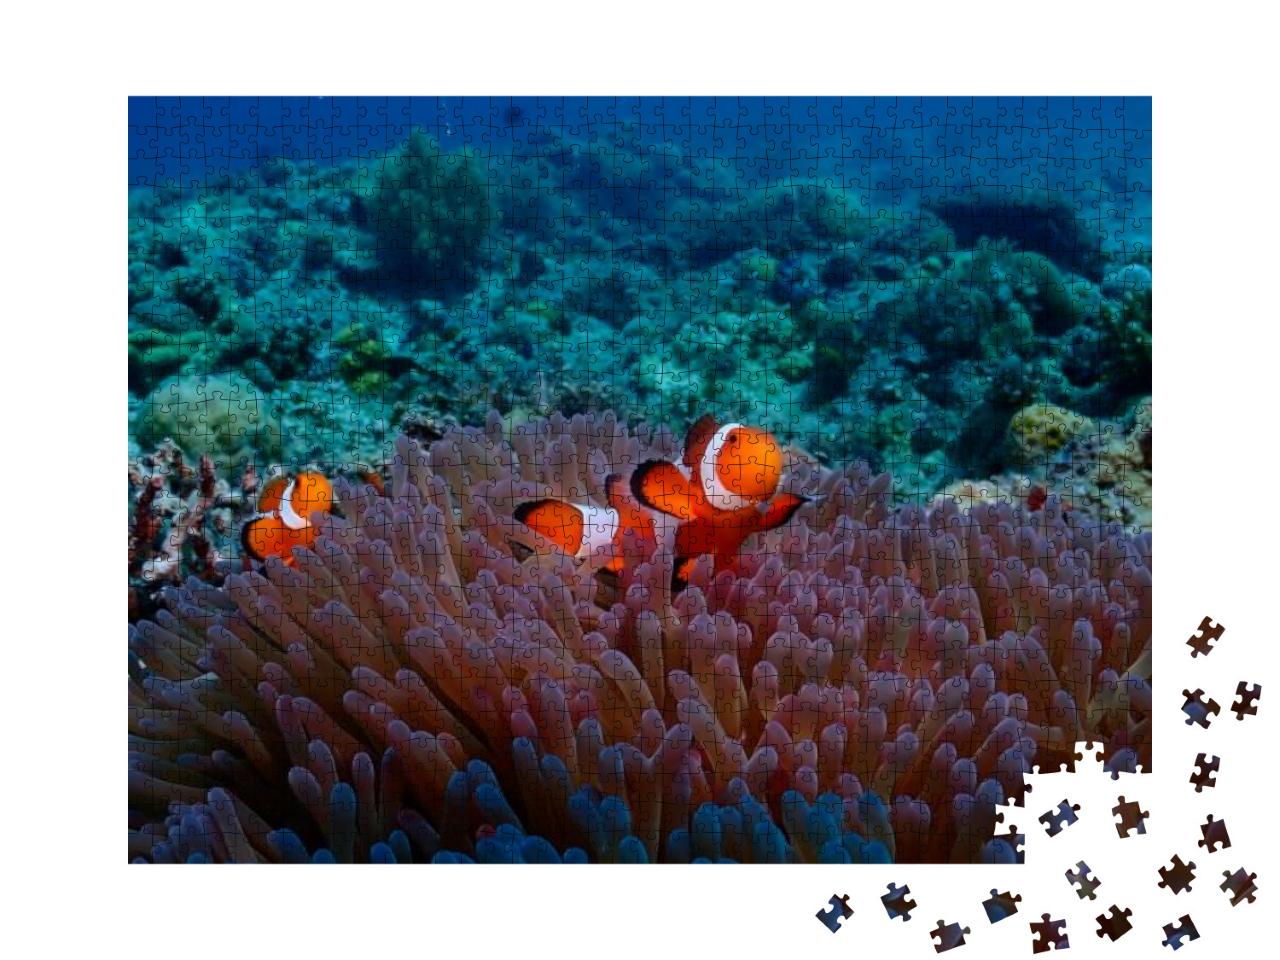 Anemone Fish from Malapascua Dive Site... Jigsaw Puzzle with 1000 pieces